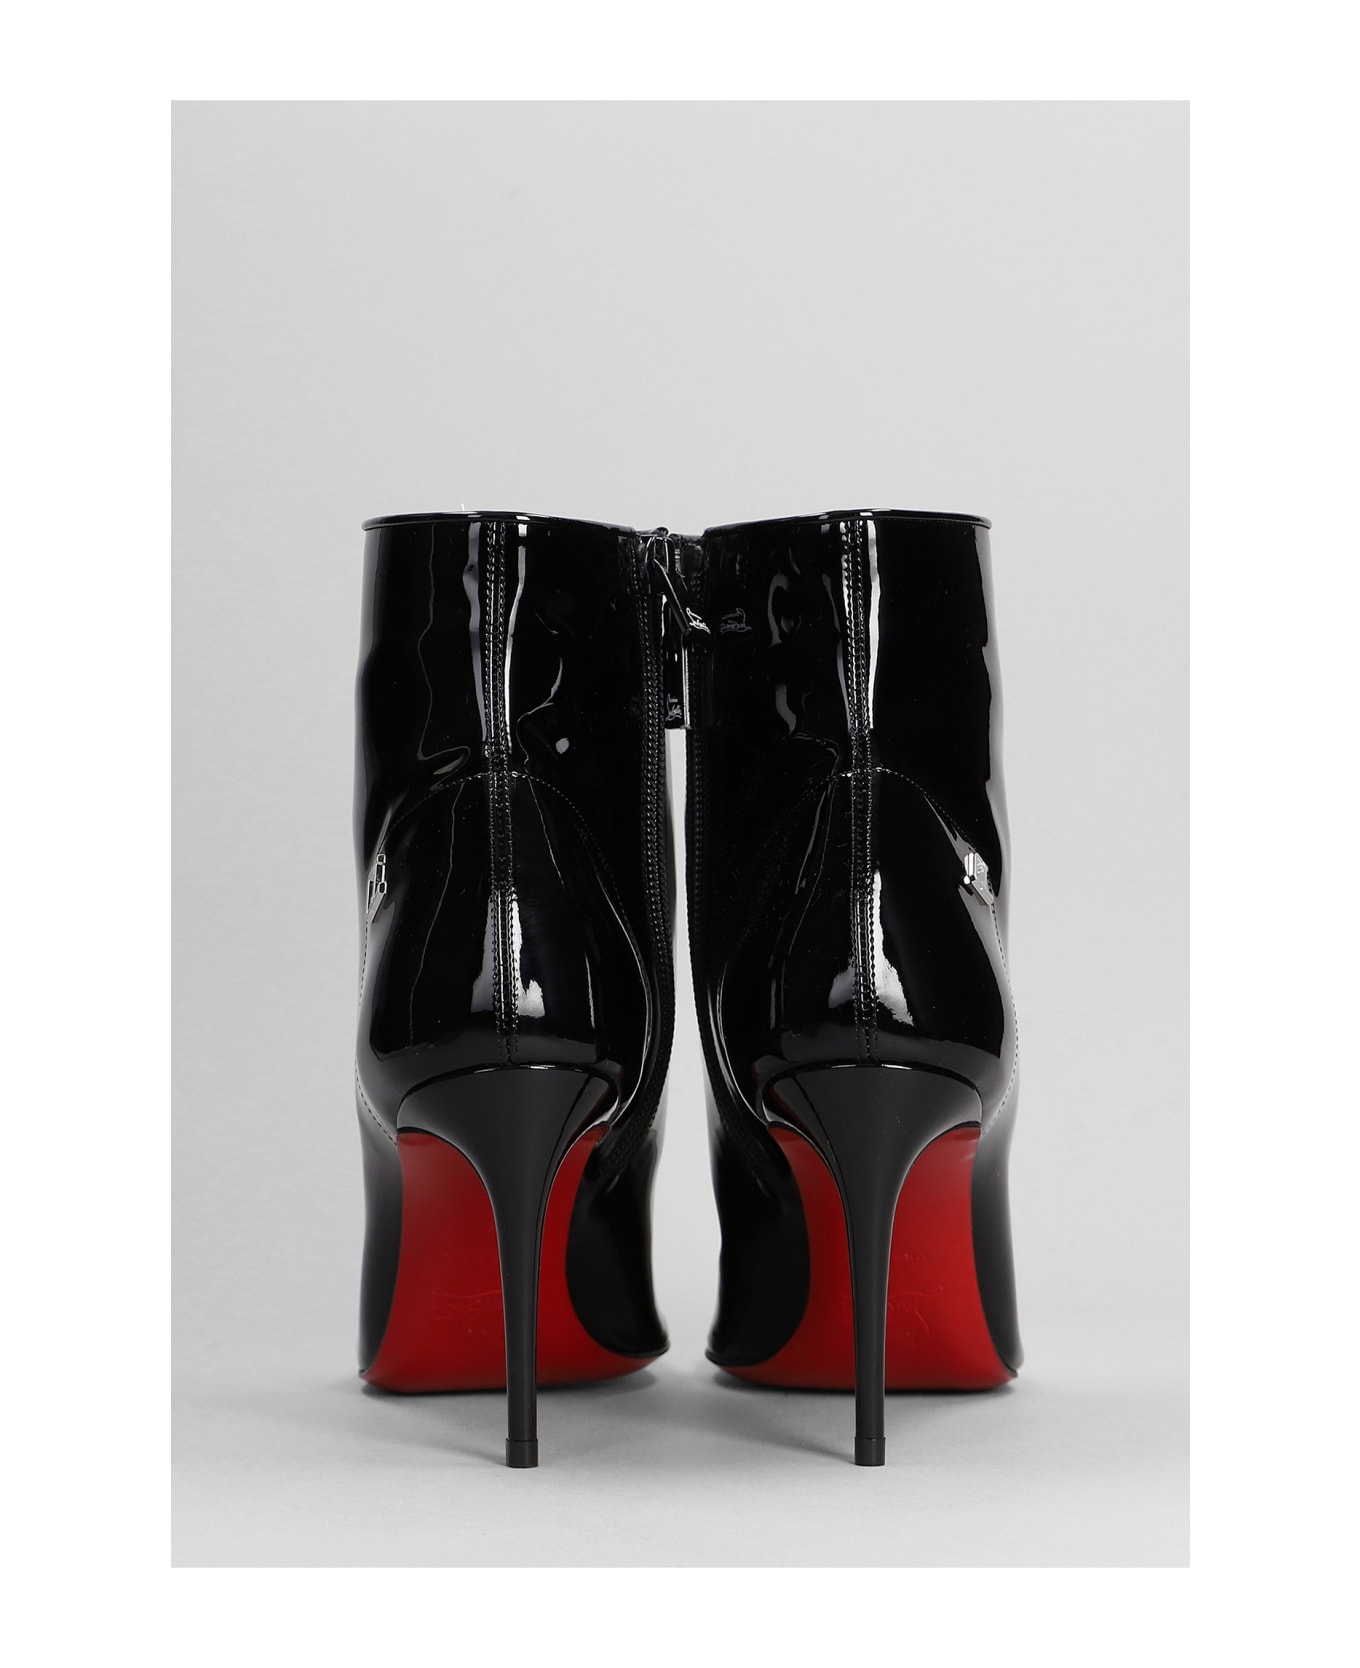 Christian Louboutin Sporty Kate Booty High Heels Ankle Boots In Black Patent Leather - black ブーツ